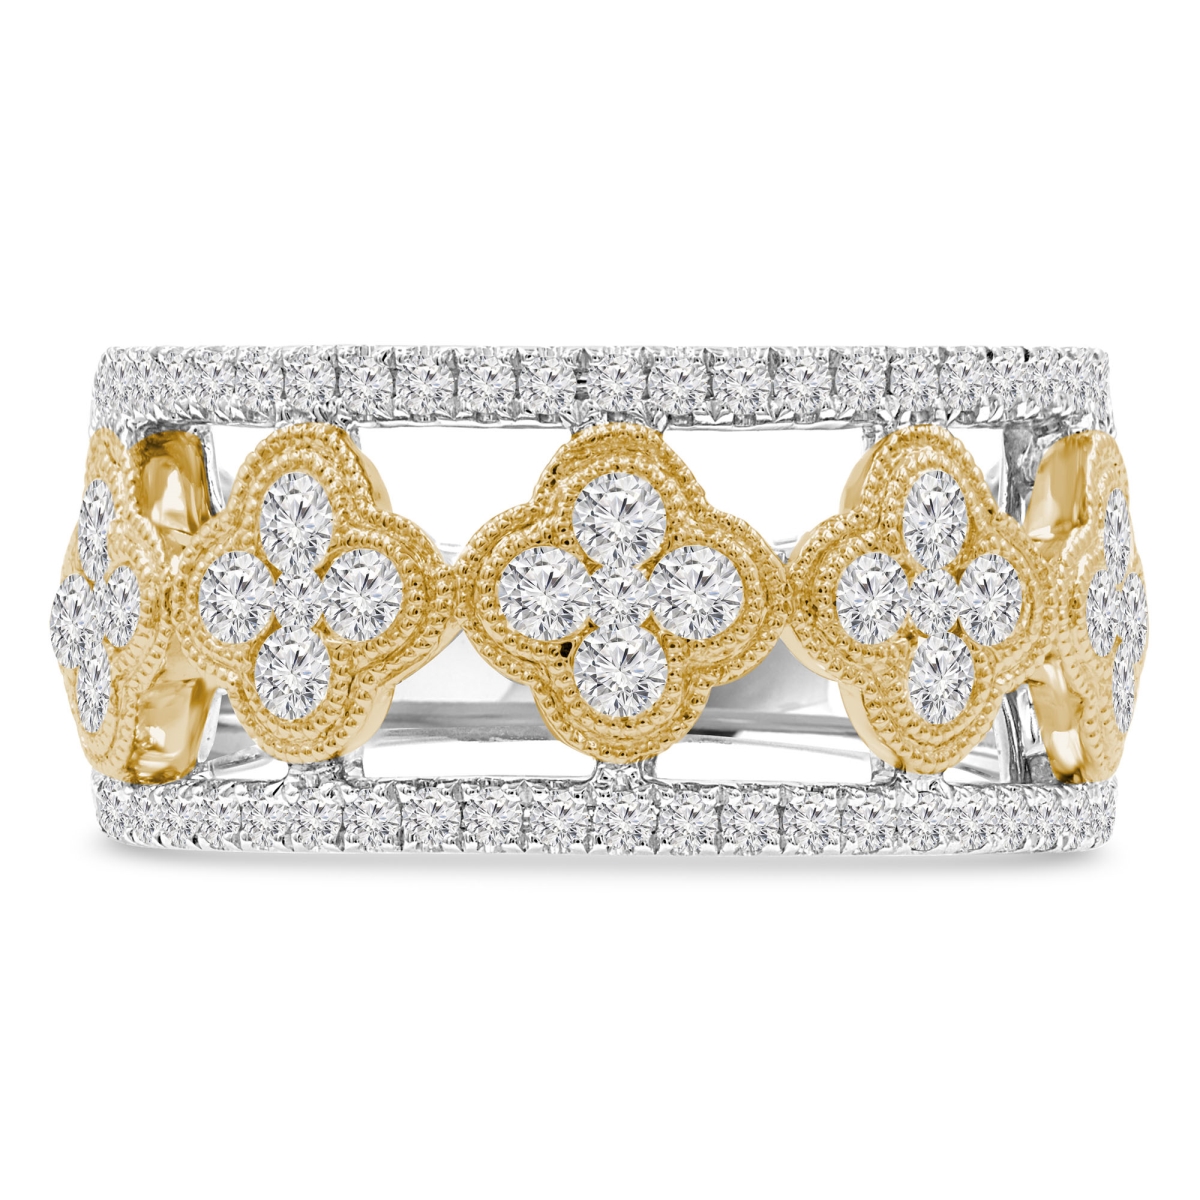 Picture of Majesty Diamonds MDR210140-7 1 CTW Round Diamond Cocktail Ring in 14K Two-Tone Gold - Size 7